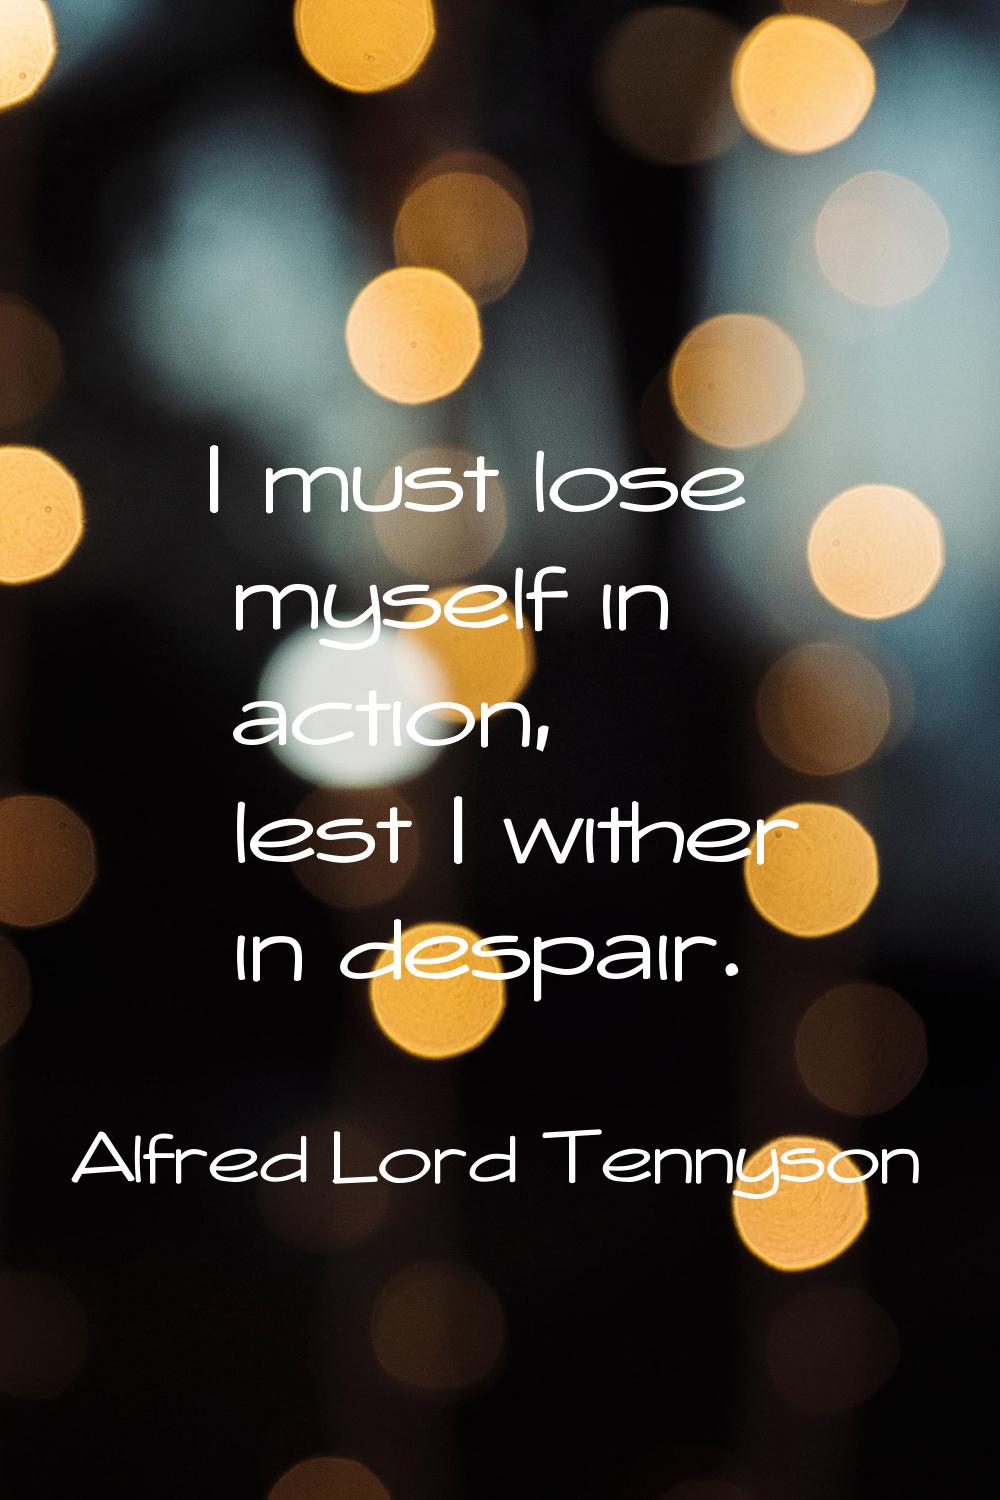 I must lose myself in action, lest I wither in despair.